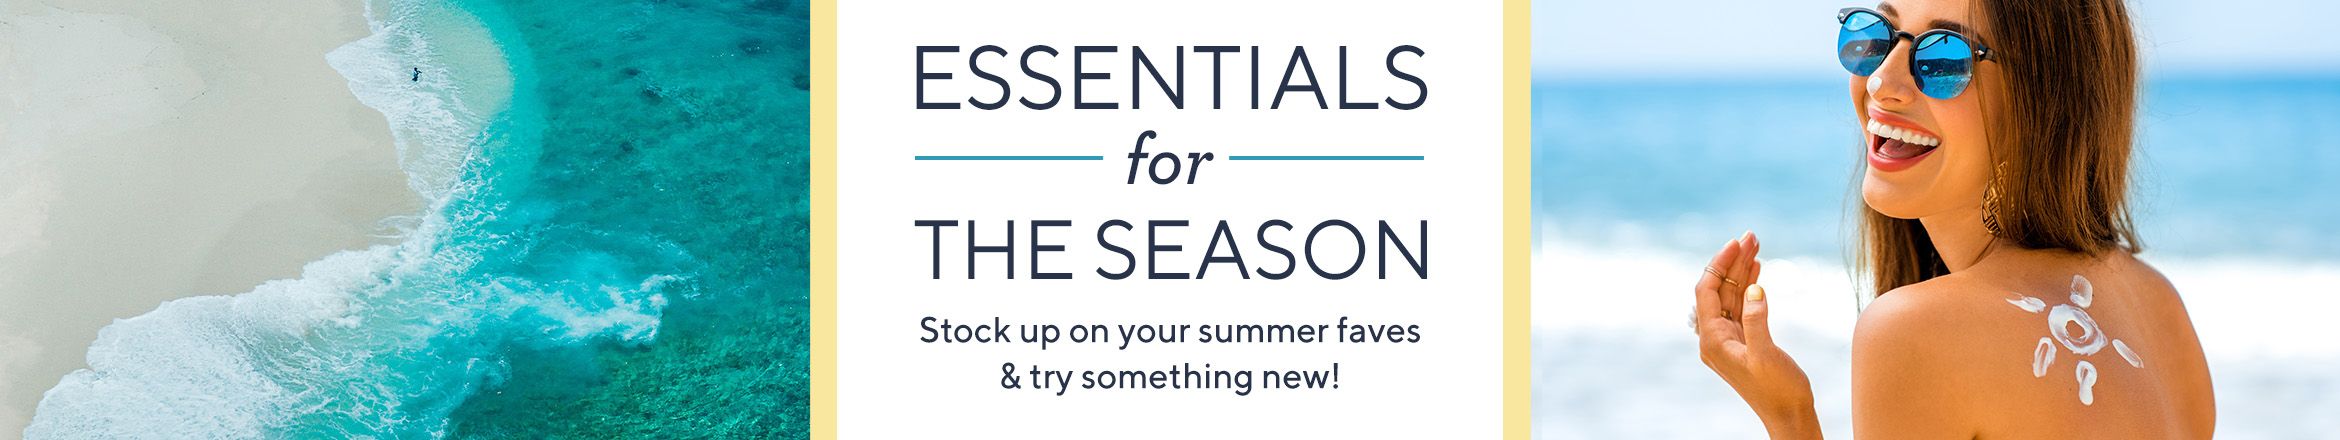 Essentials for the Season  Stock up on your summer faves & try something new!